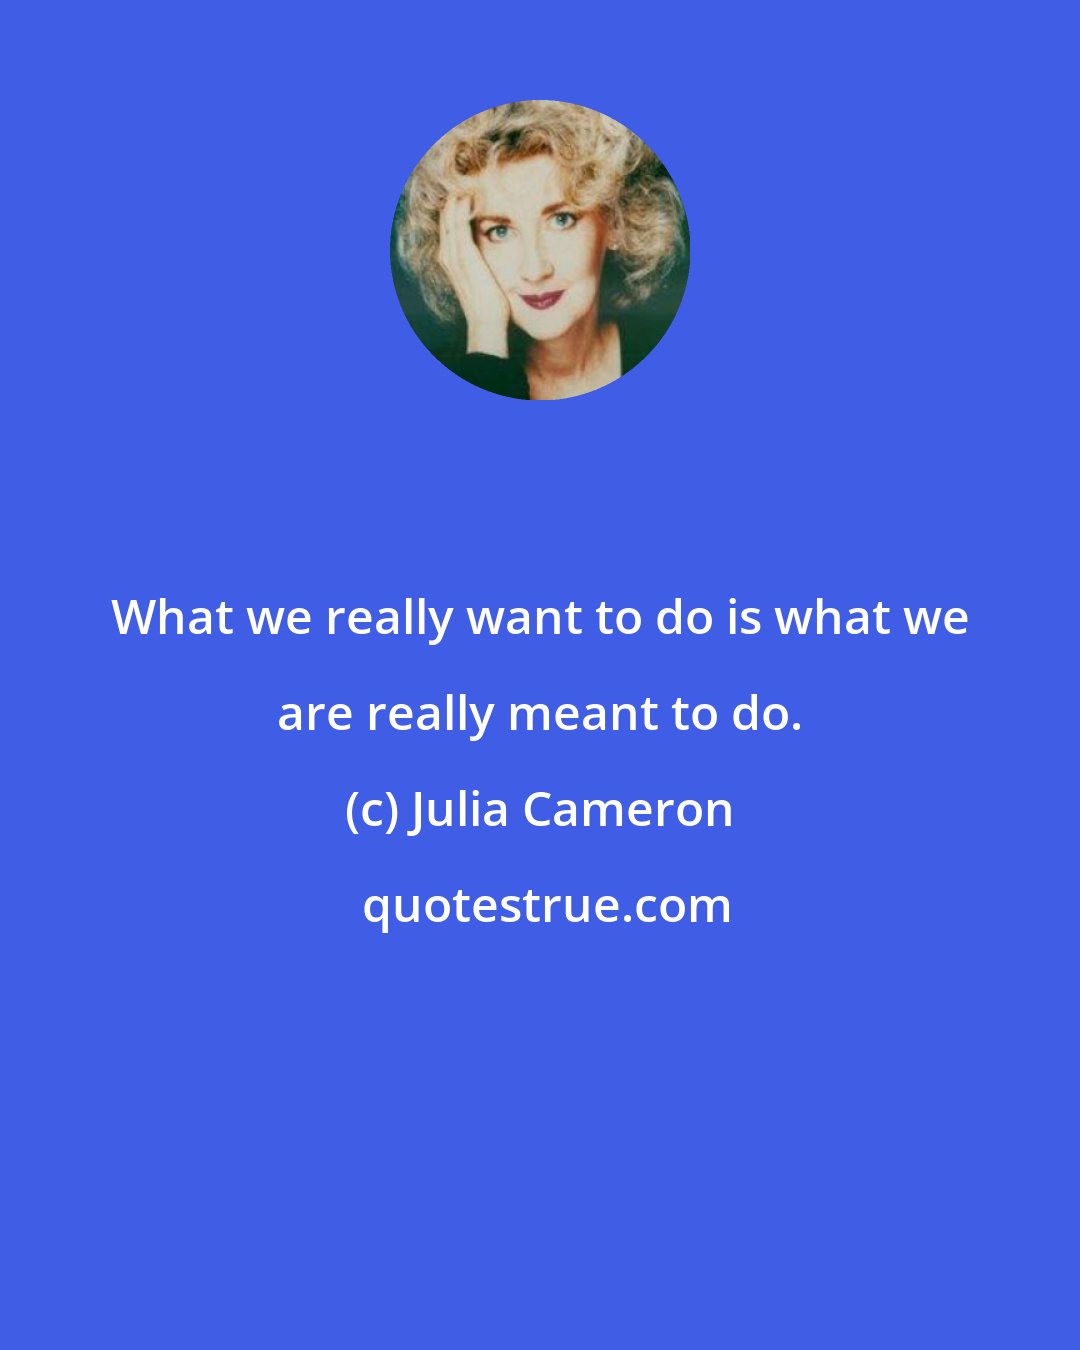 Julia Cameron: What we really want to do is what we are really meant to do.